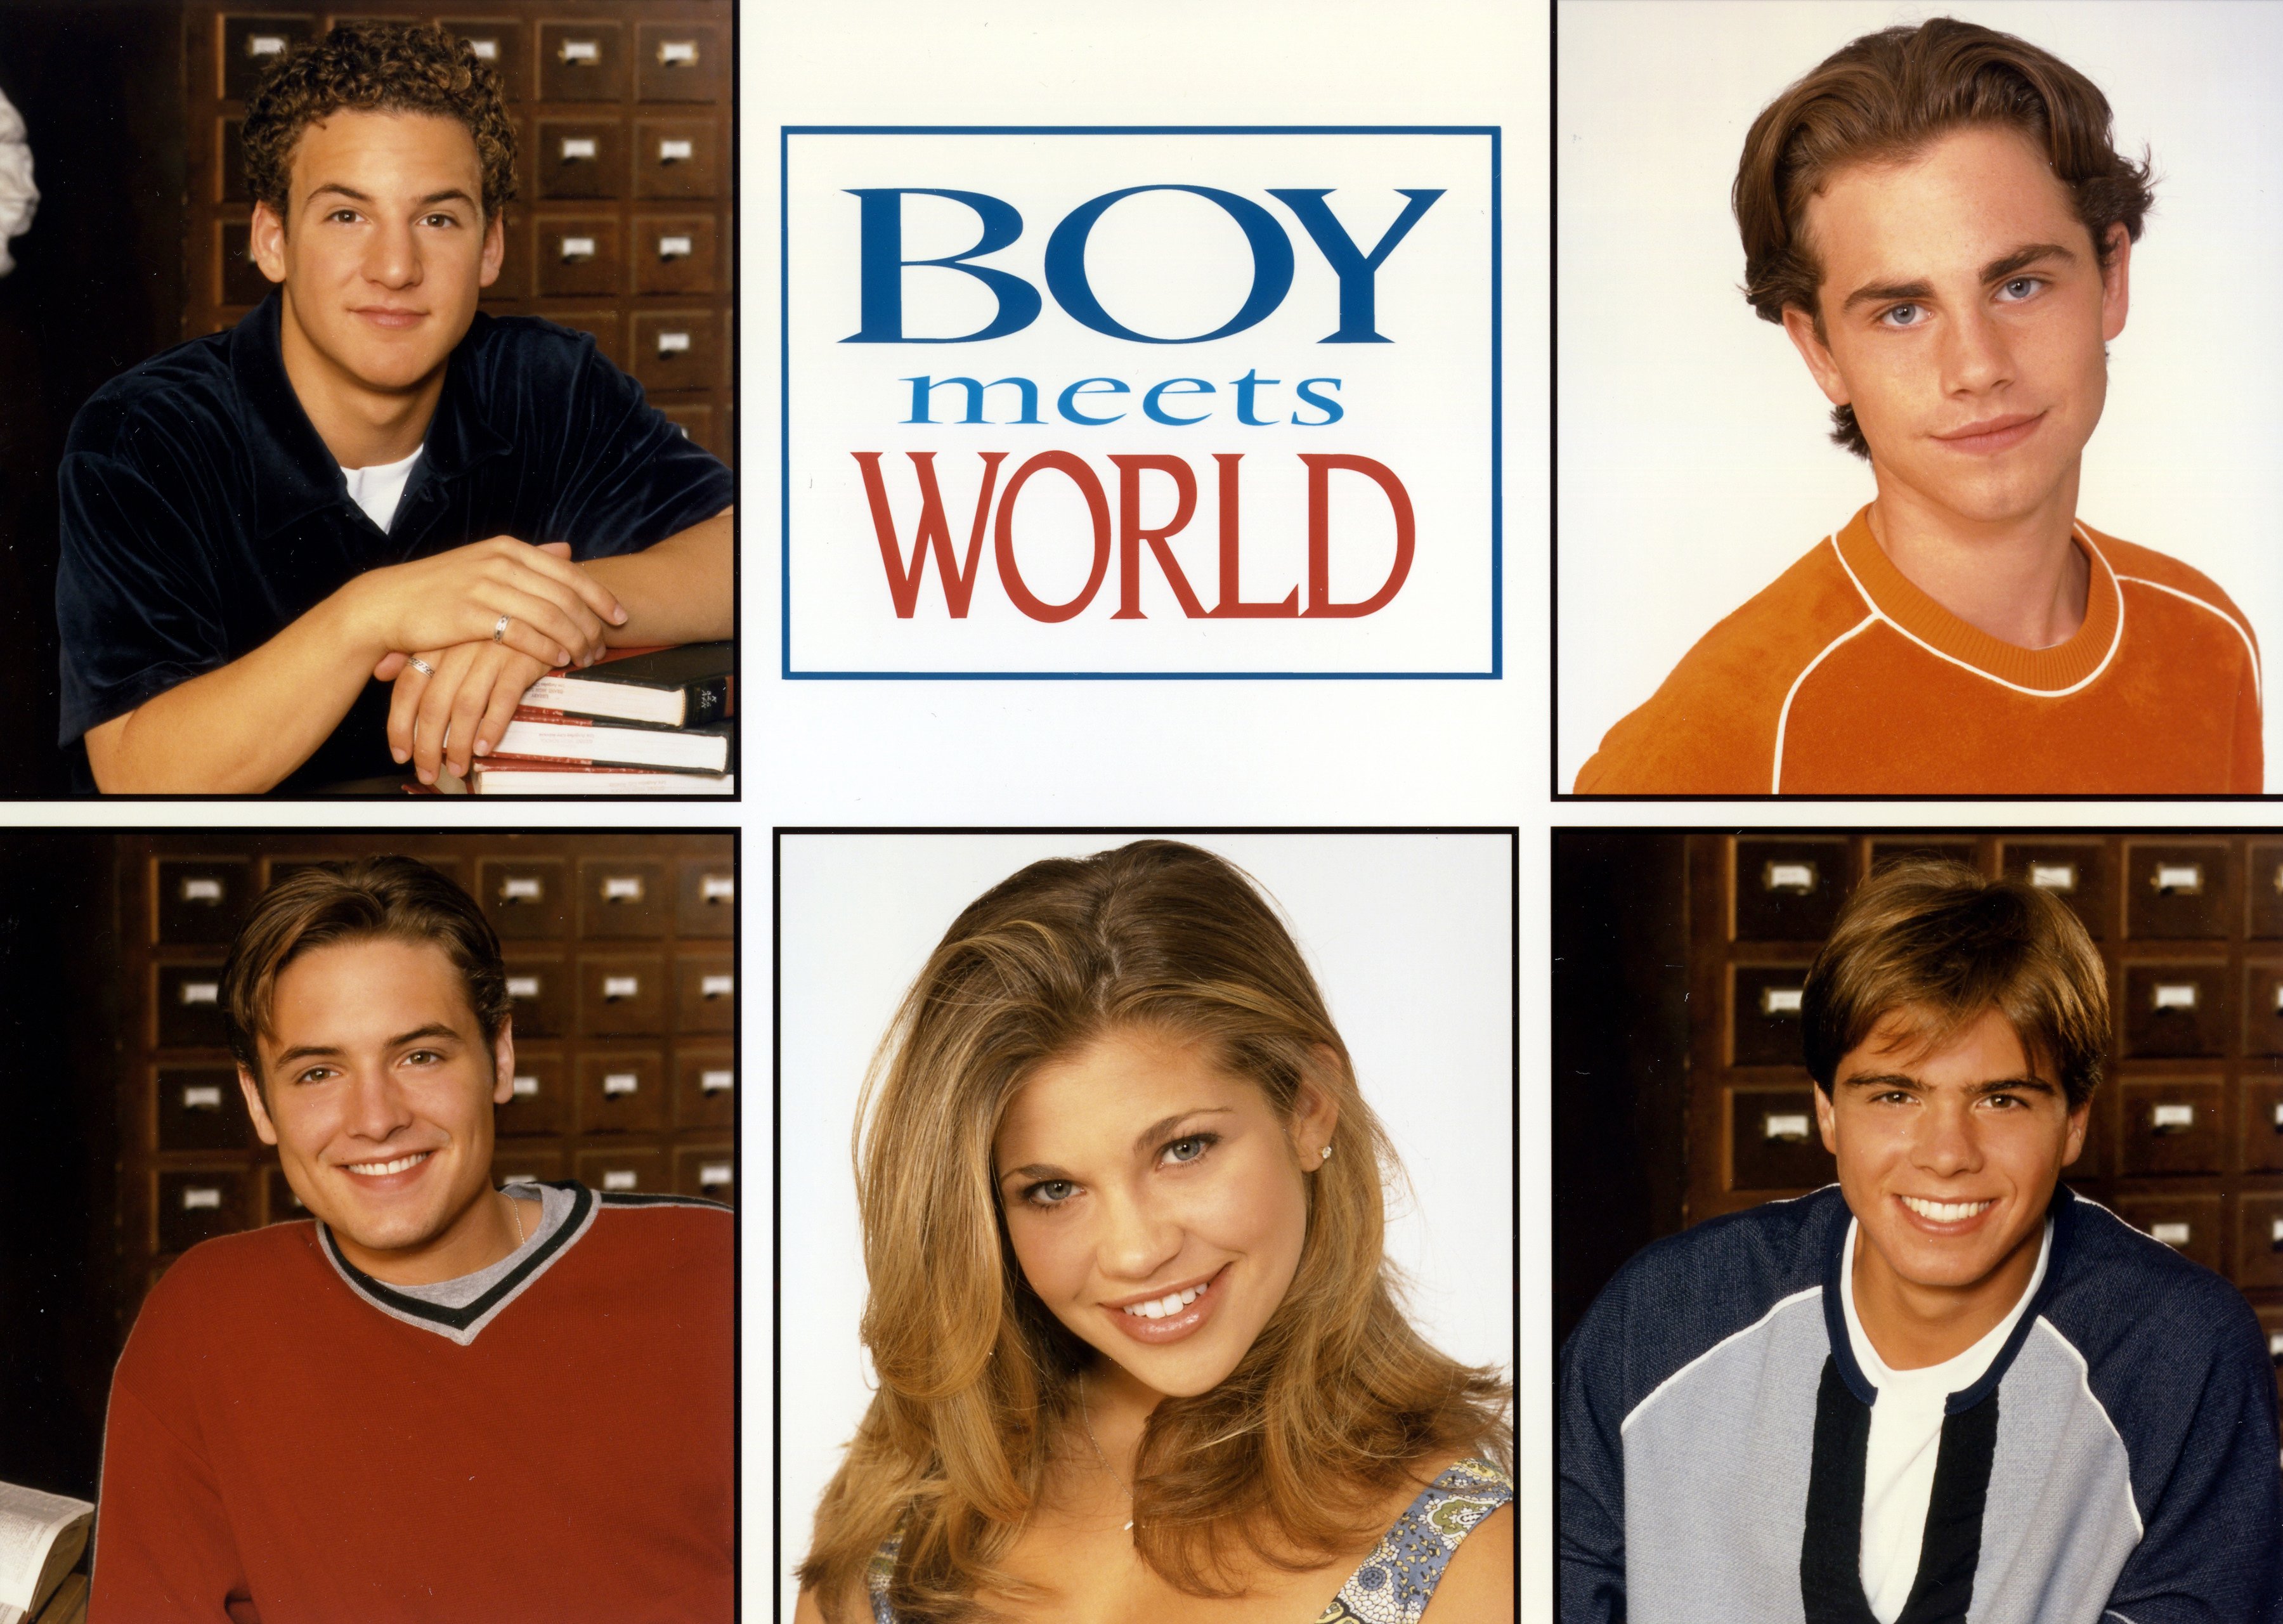 'Boy Meets World' logo with surrounding headshots of the cast including Ben Savage, Will Friedle, Danielle Fishel, Matthew Lawrence, and Rider Strong